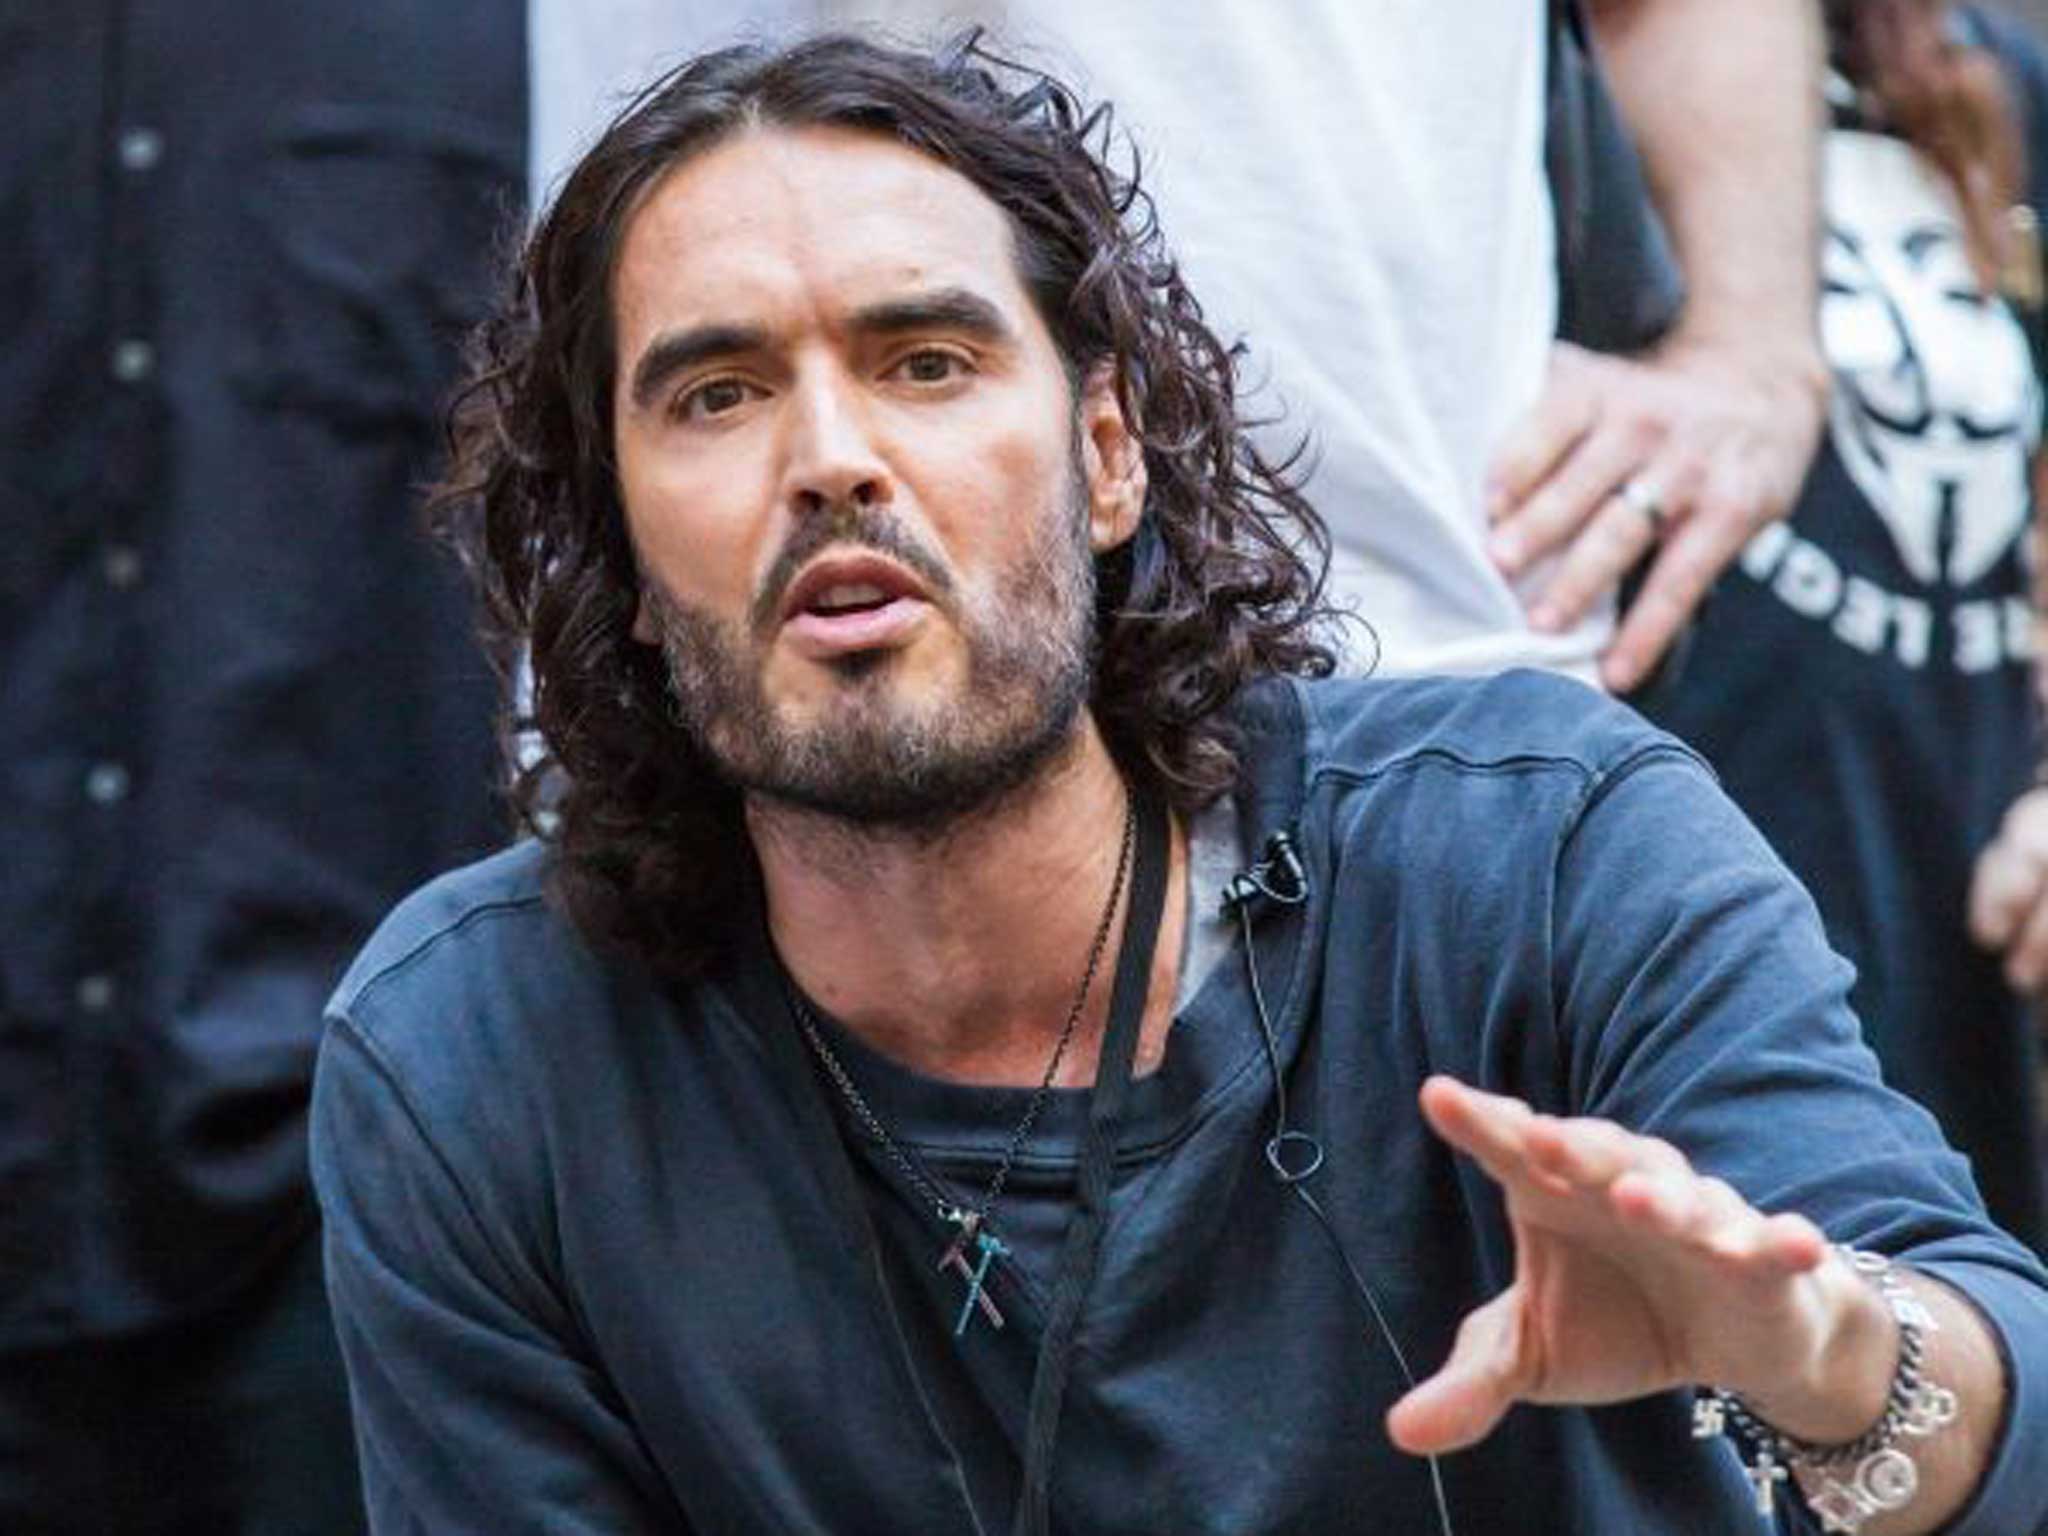 Russell Brand speaking to an Occupy Wall Street crowd in New York